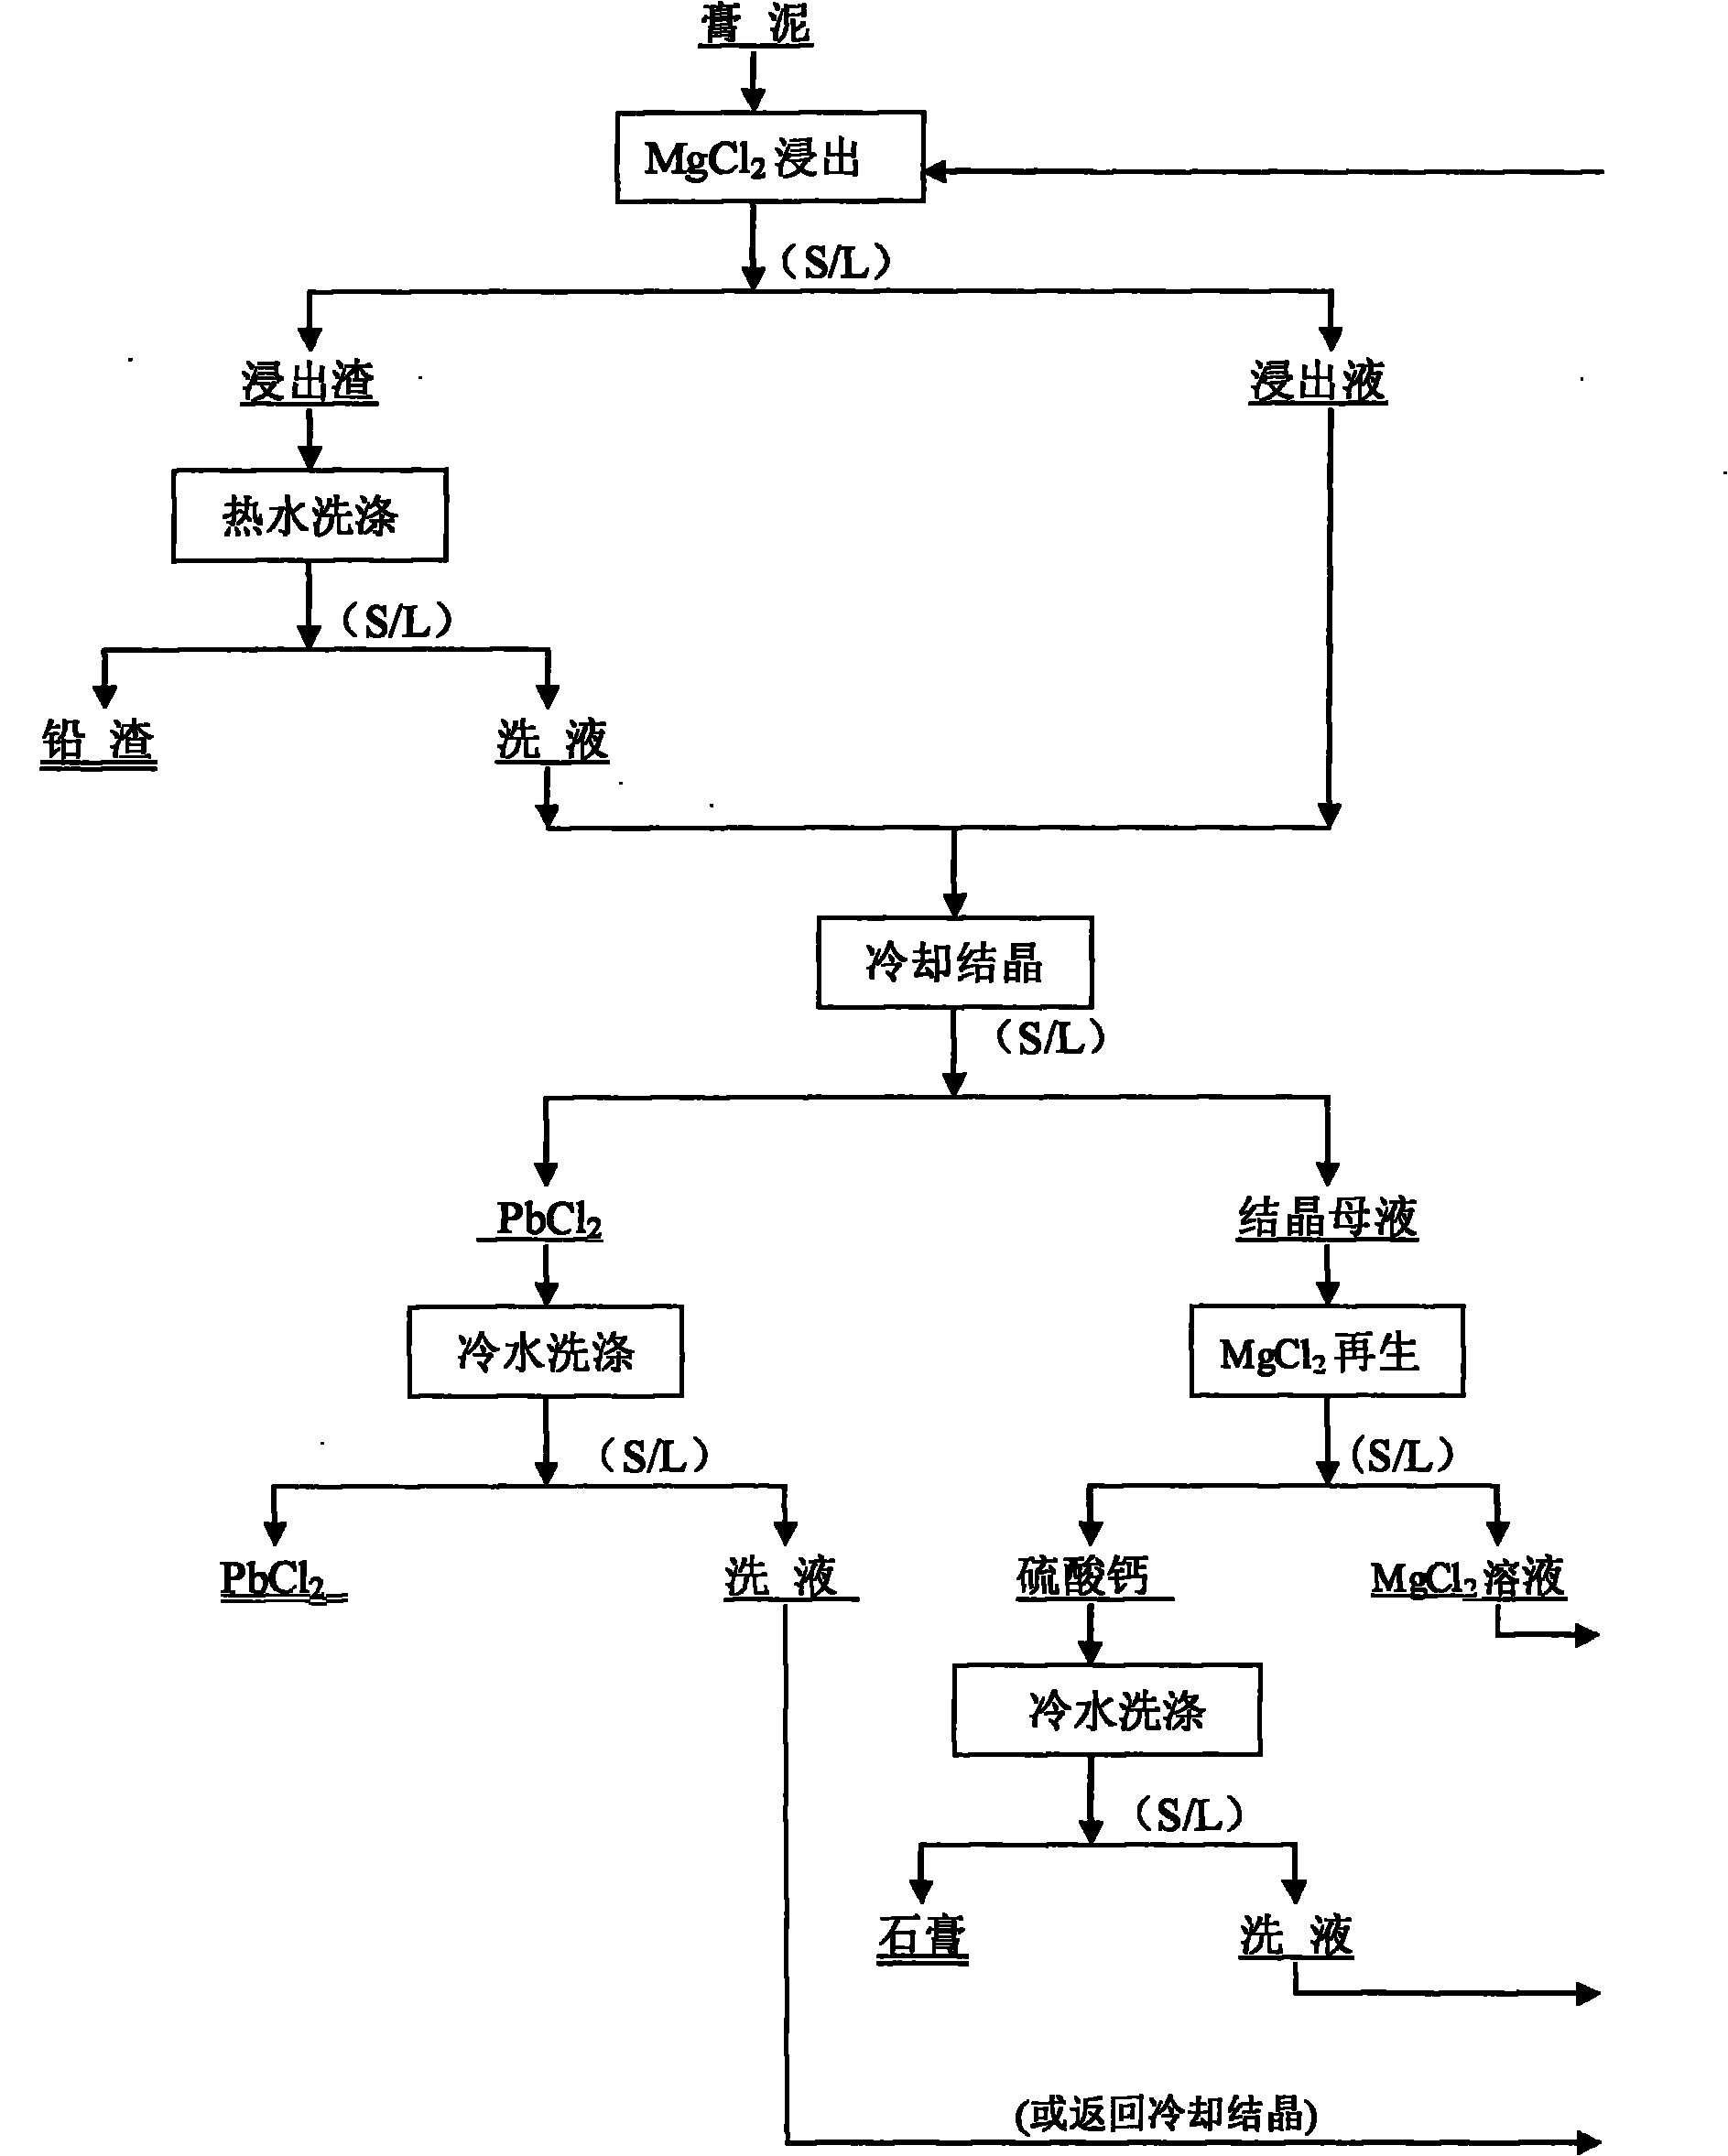 Method for removing sulfur from waste lead-acid storage battery gypsum mud by using magnesium chloride